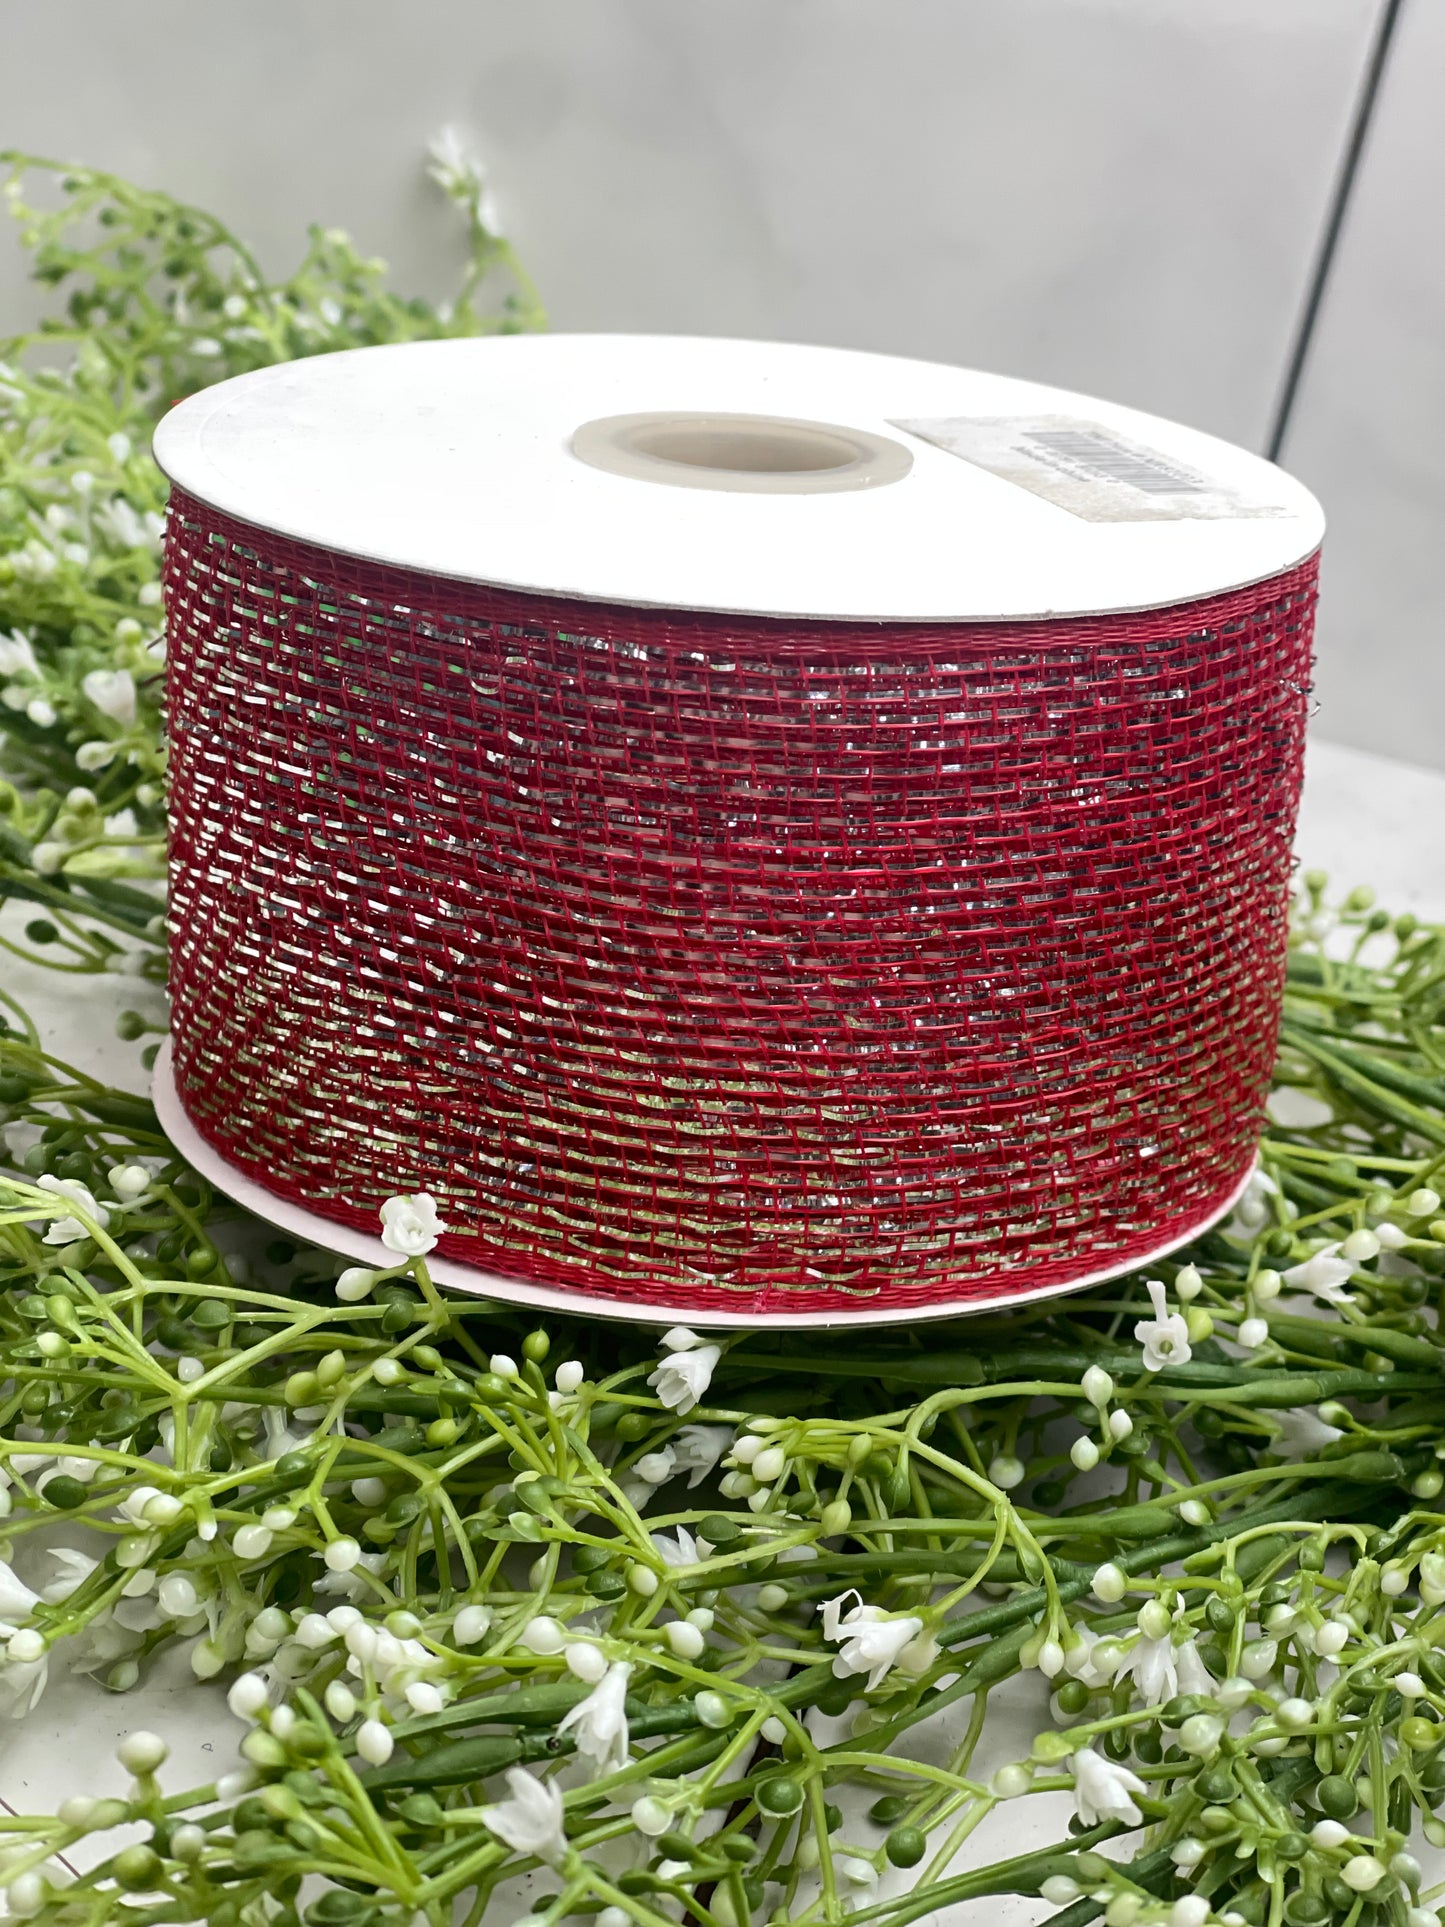 3 Inch by 20 Yards Designer Netting Red with Silver Glamour